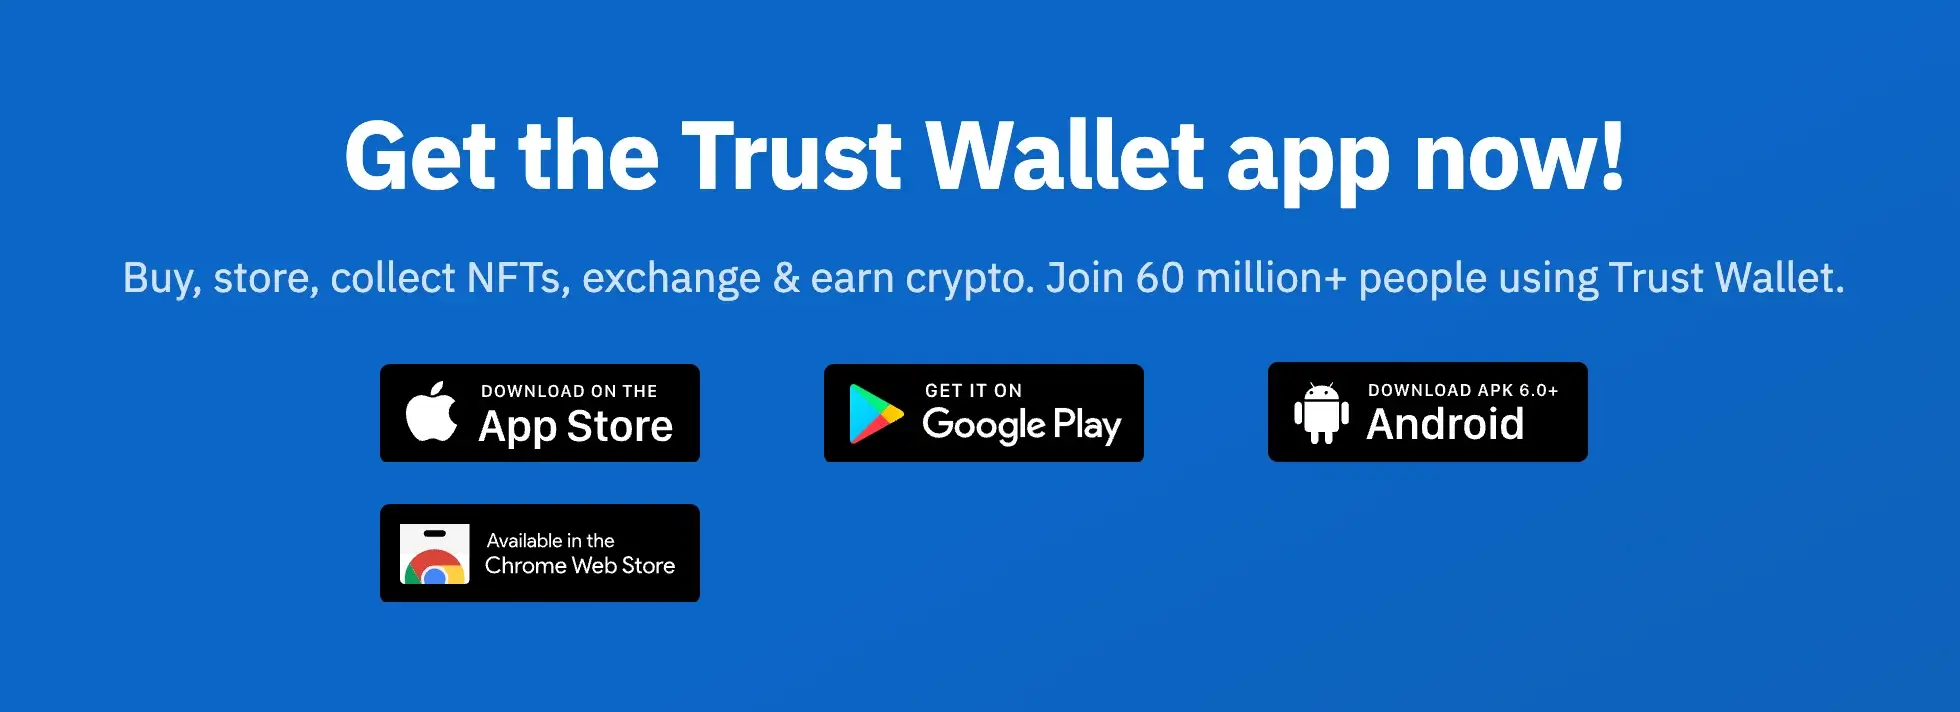 Step 1: Download the Trust Wallet Application